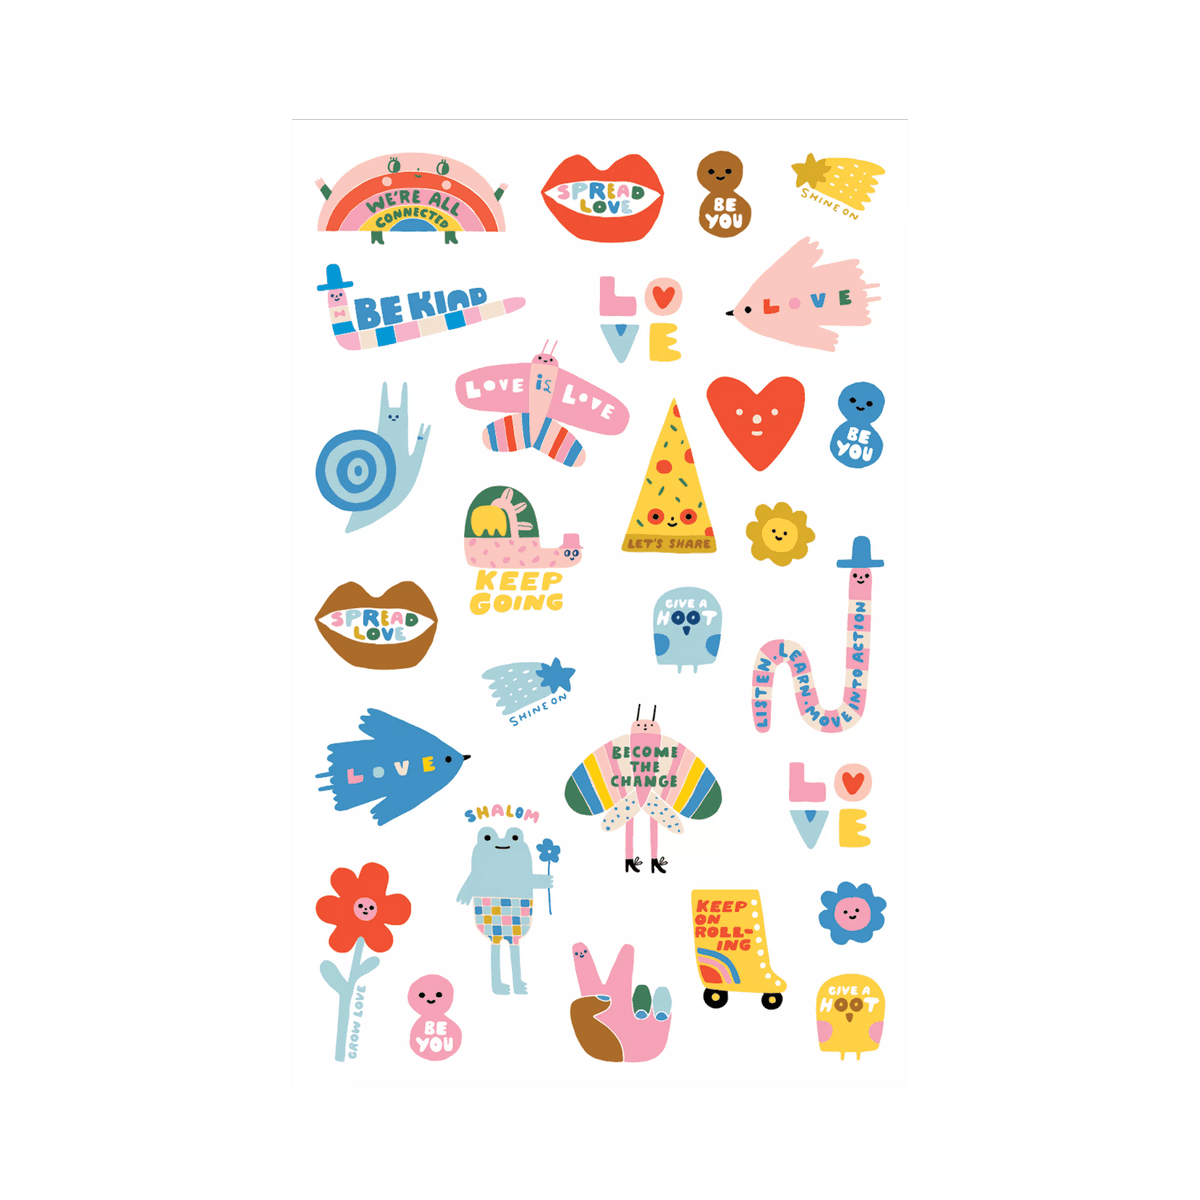 Stickers Sweet Spring (Spread)